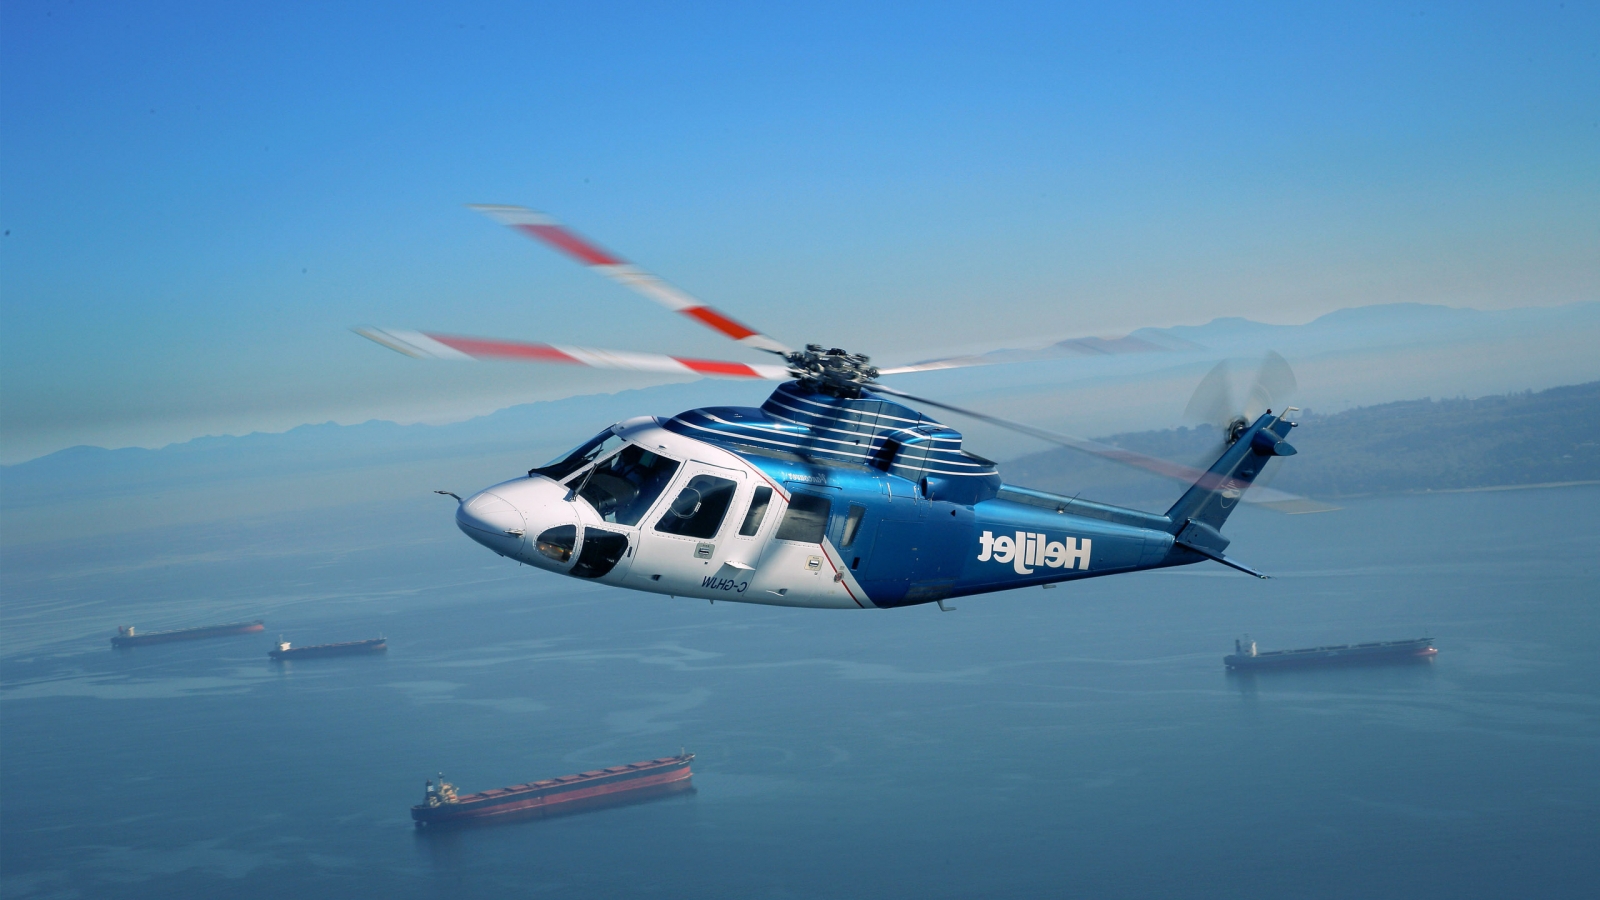 Download Helicopters wallpapers for mobile phone free Helicopters HD  pictures